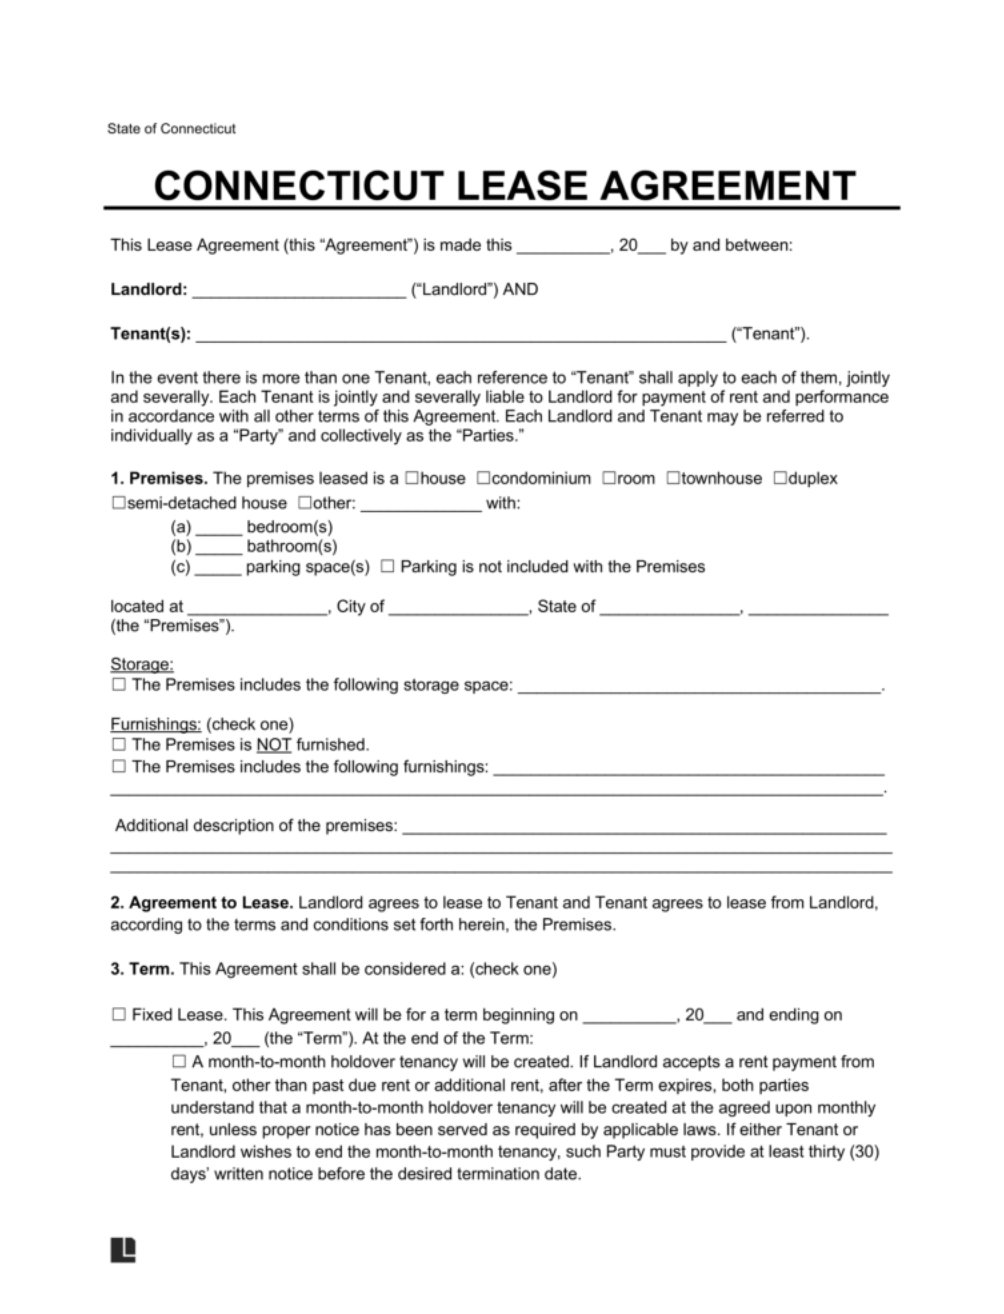 LegalTemplates Connecticut Residential Lease Agreement